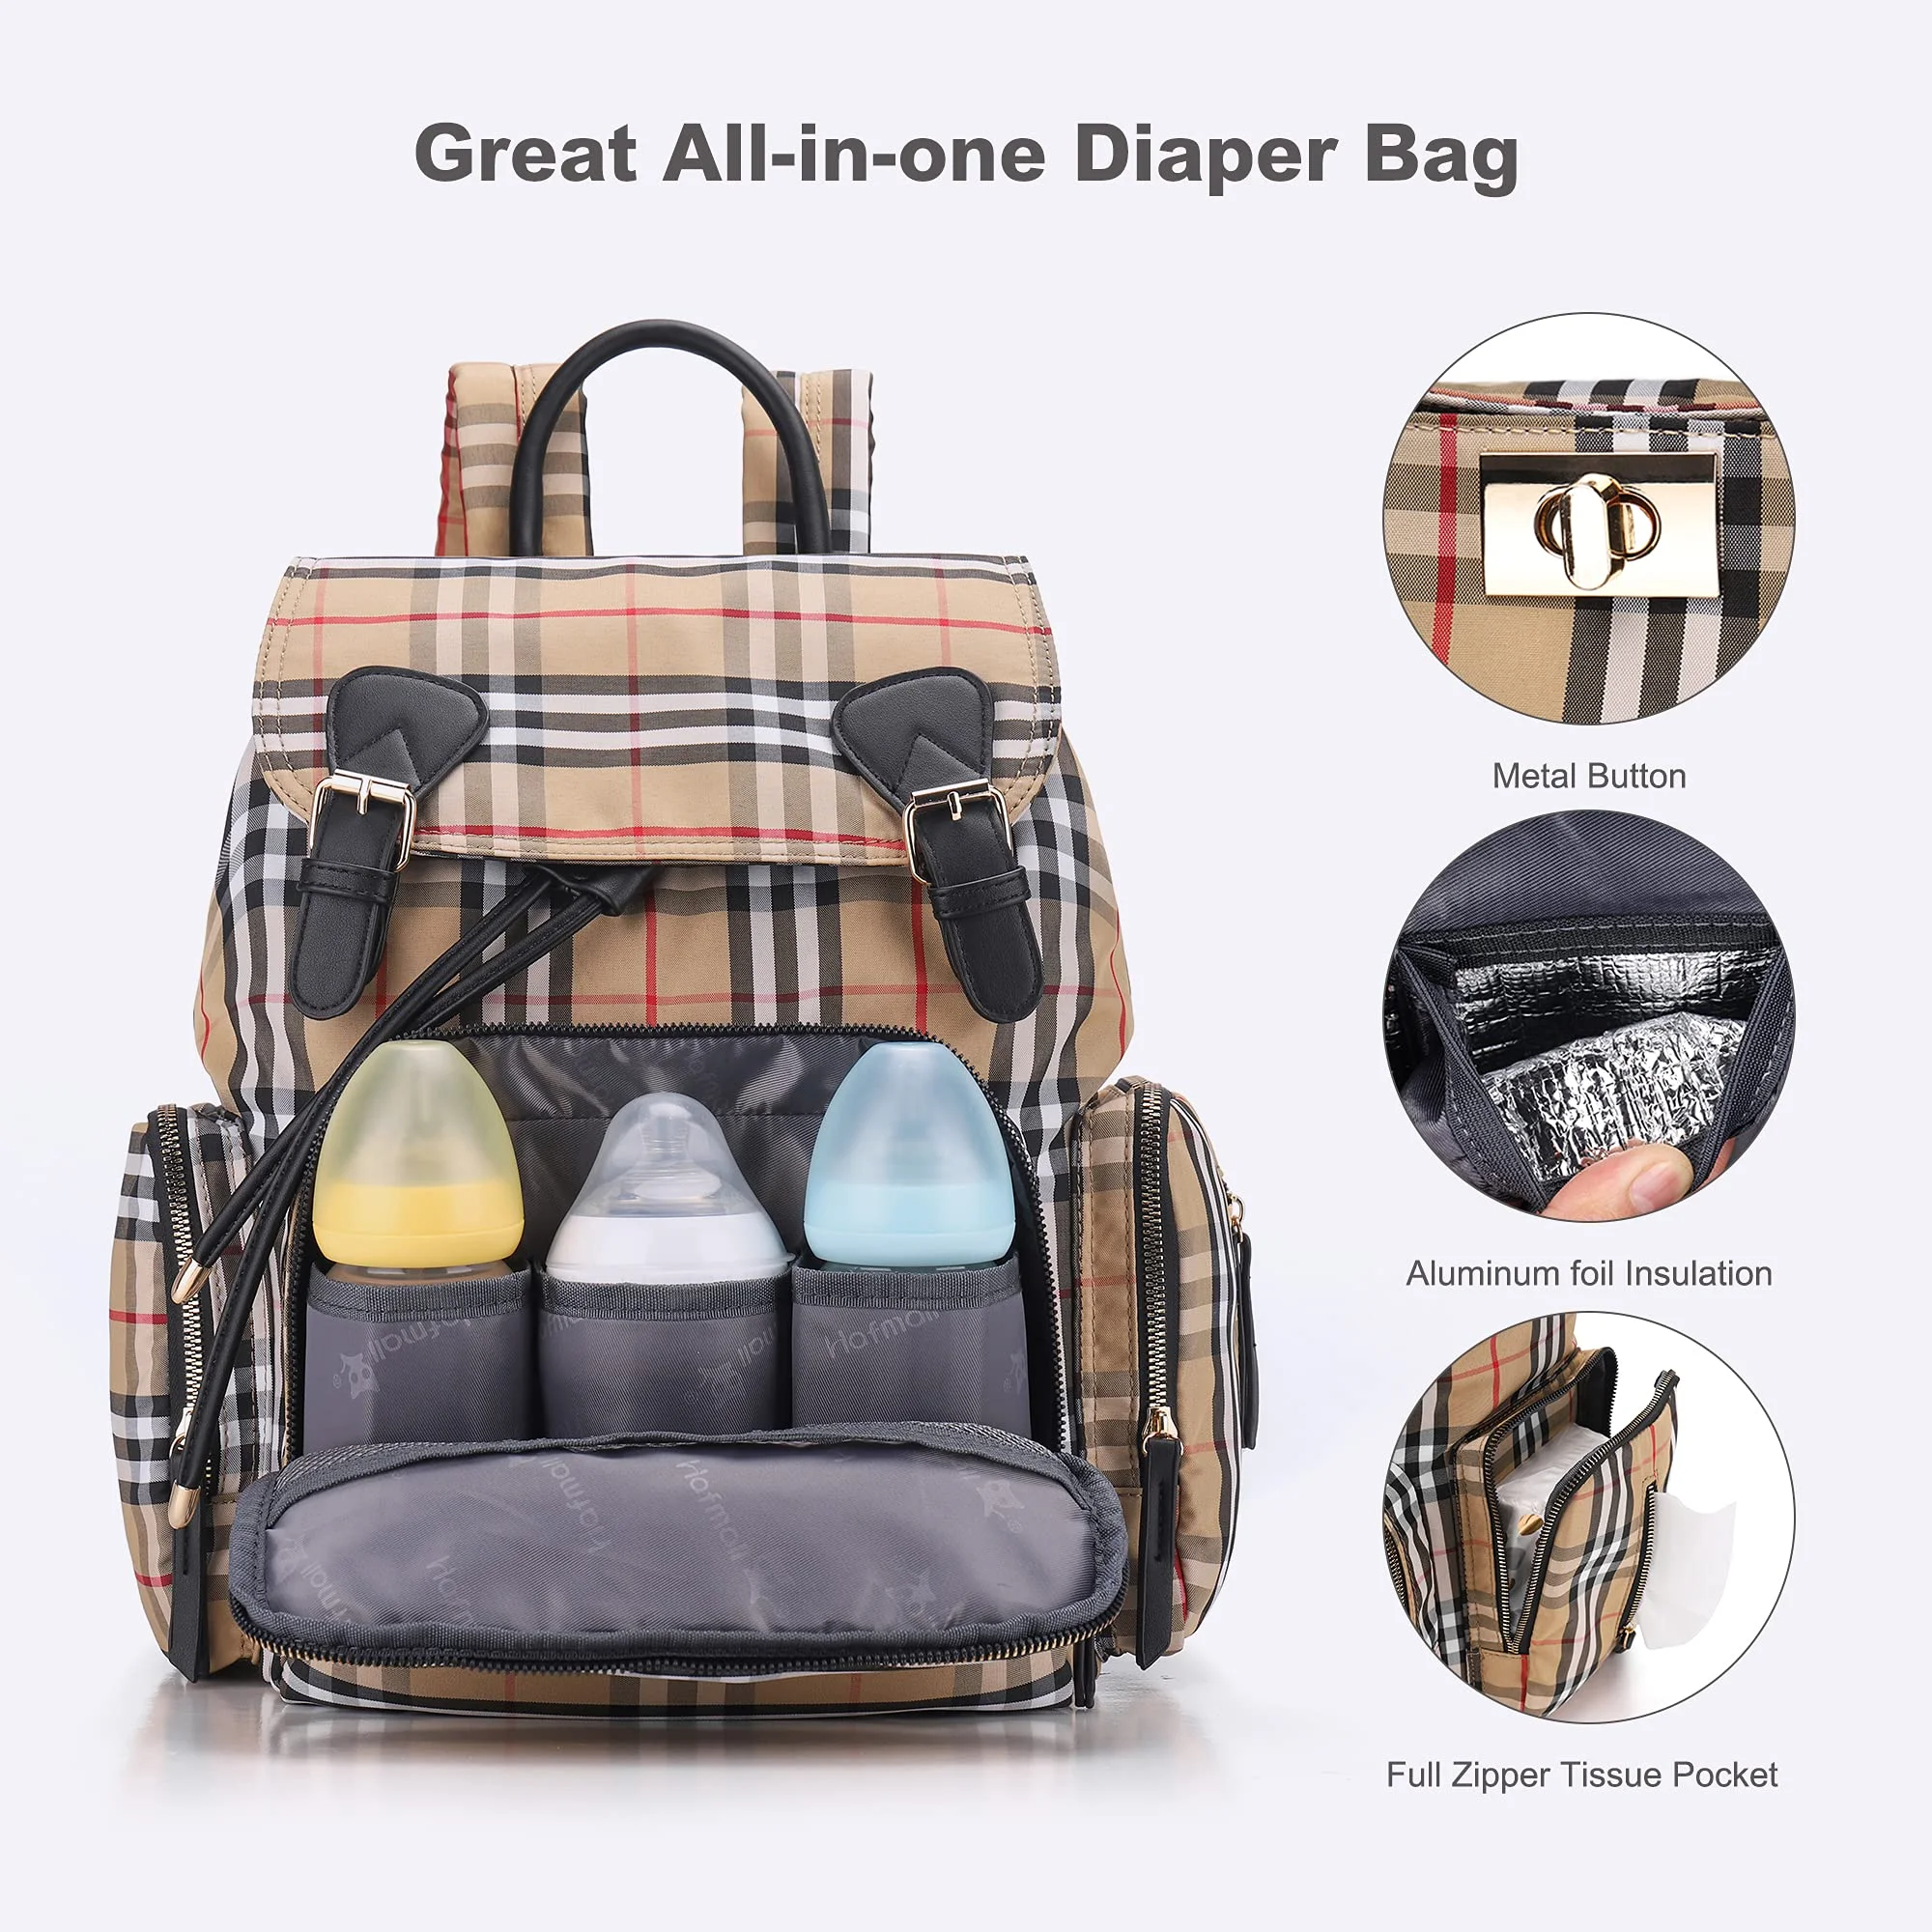 High Quality wholesale luxury diaper bags water resistant personalized women diaper bag backpacks outdoor travel bags with usb